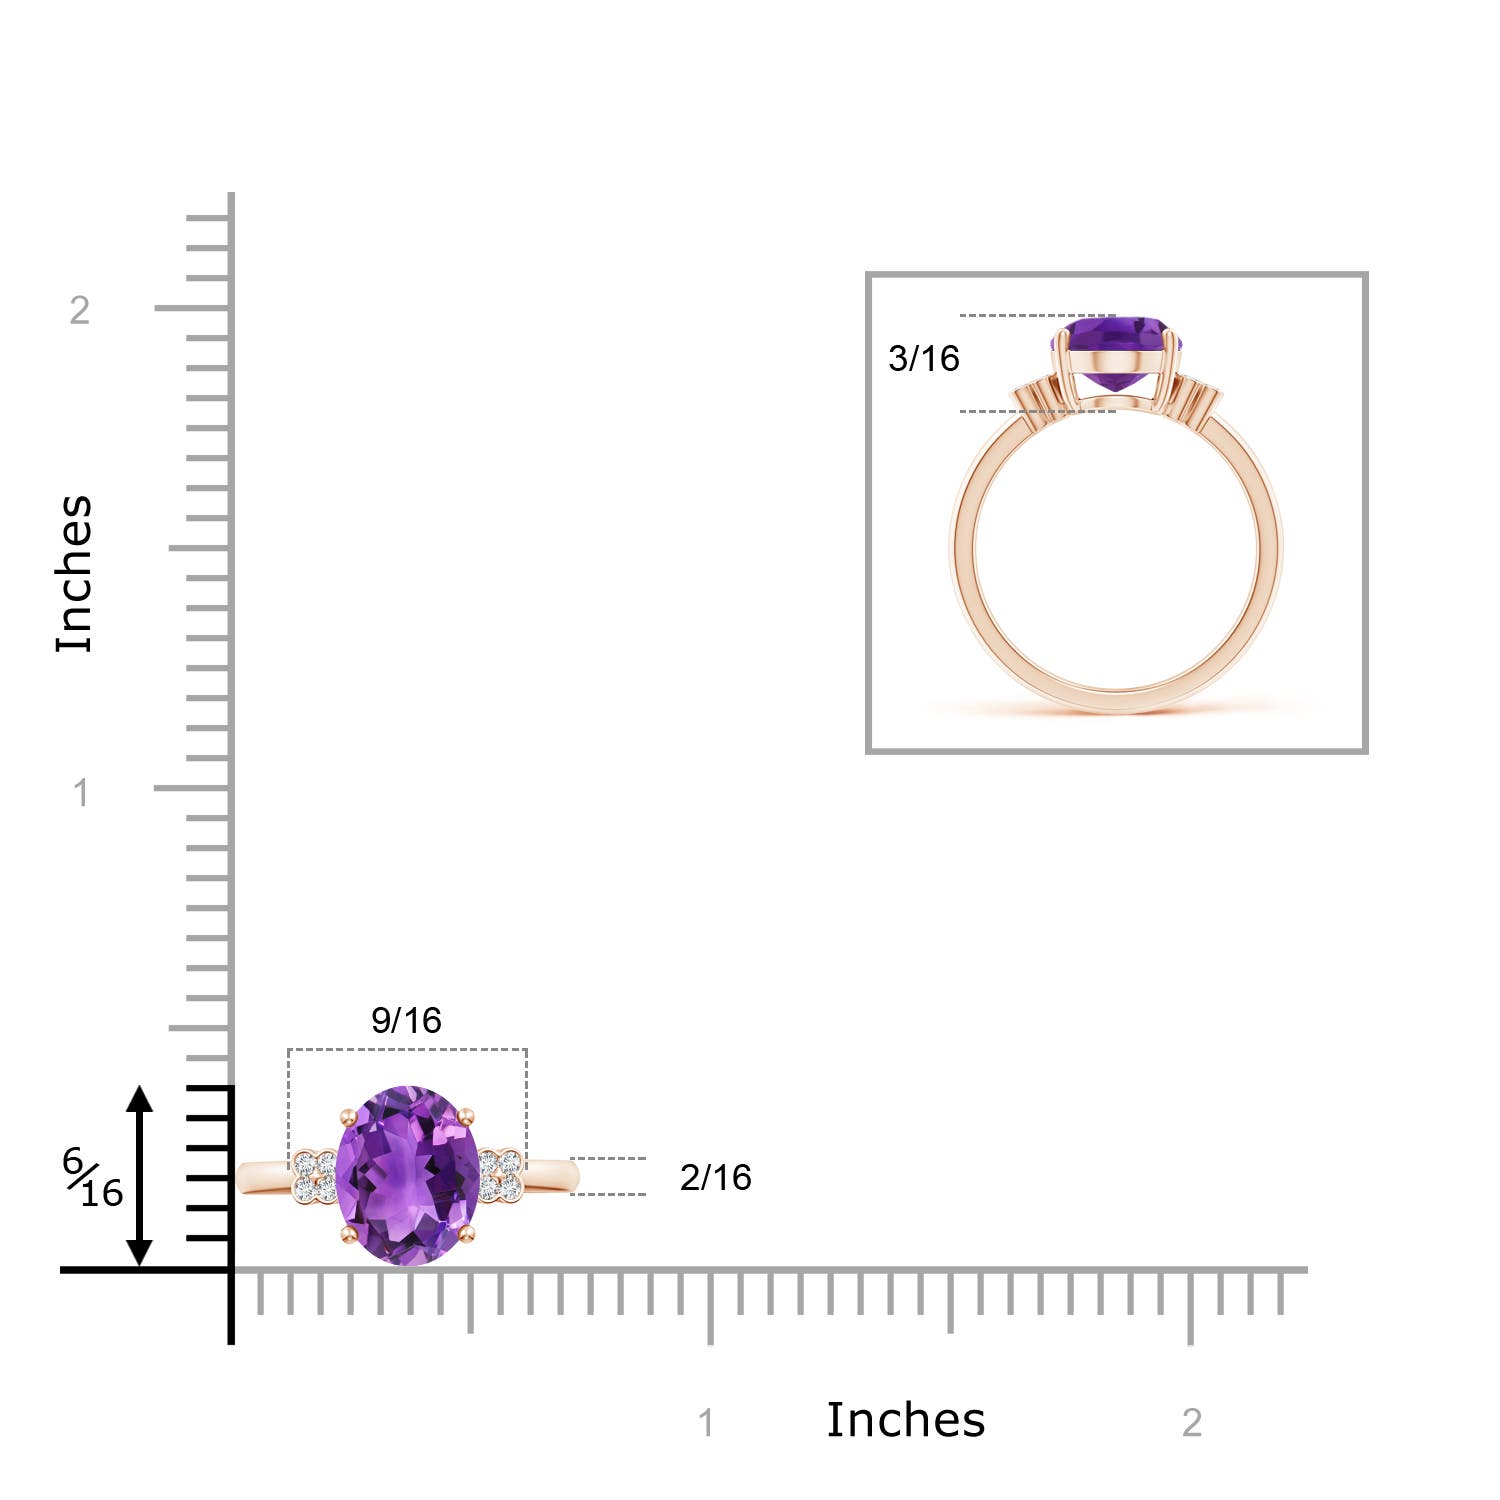 AAA - Amethyst / 2.36 CT / 14 KT Rose Gold